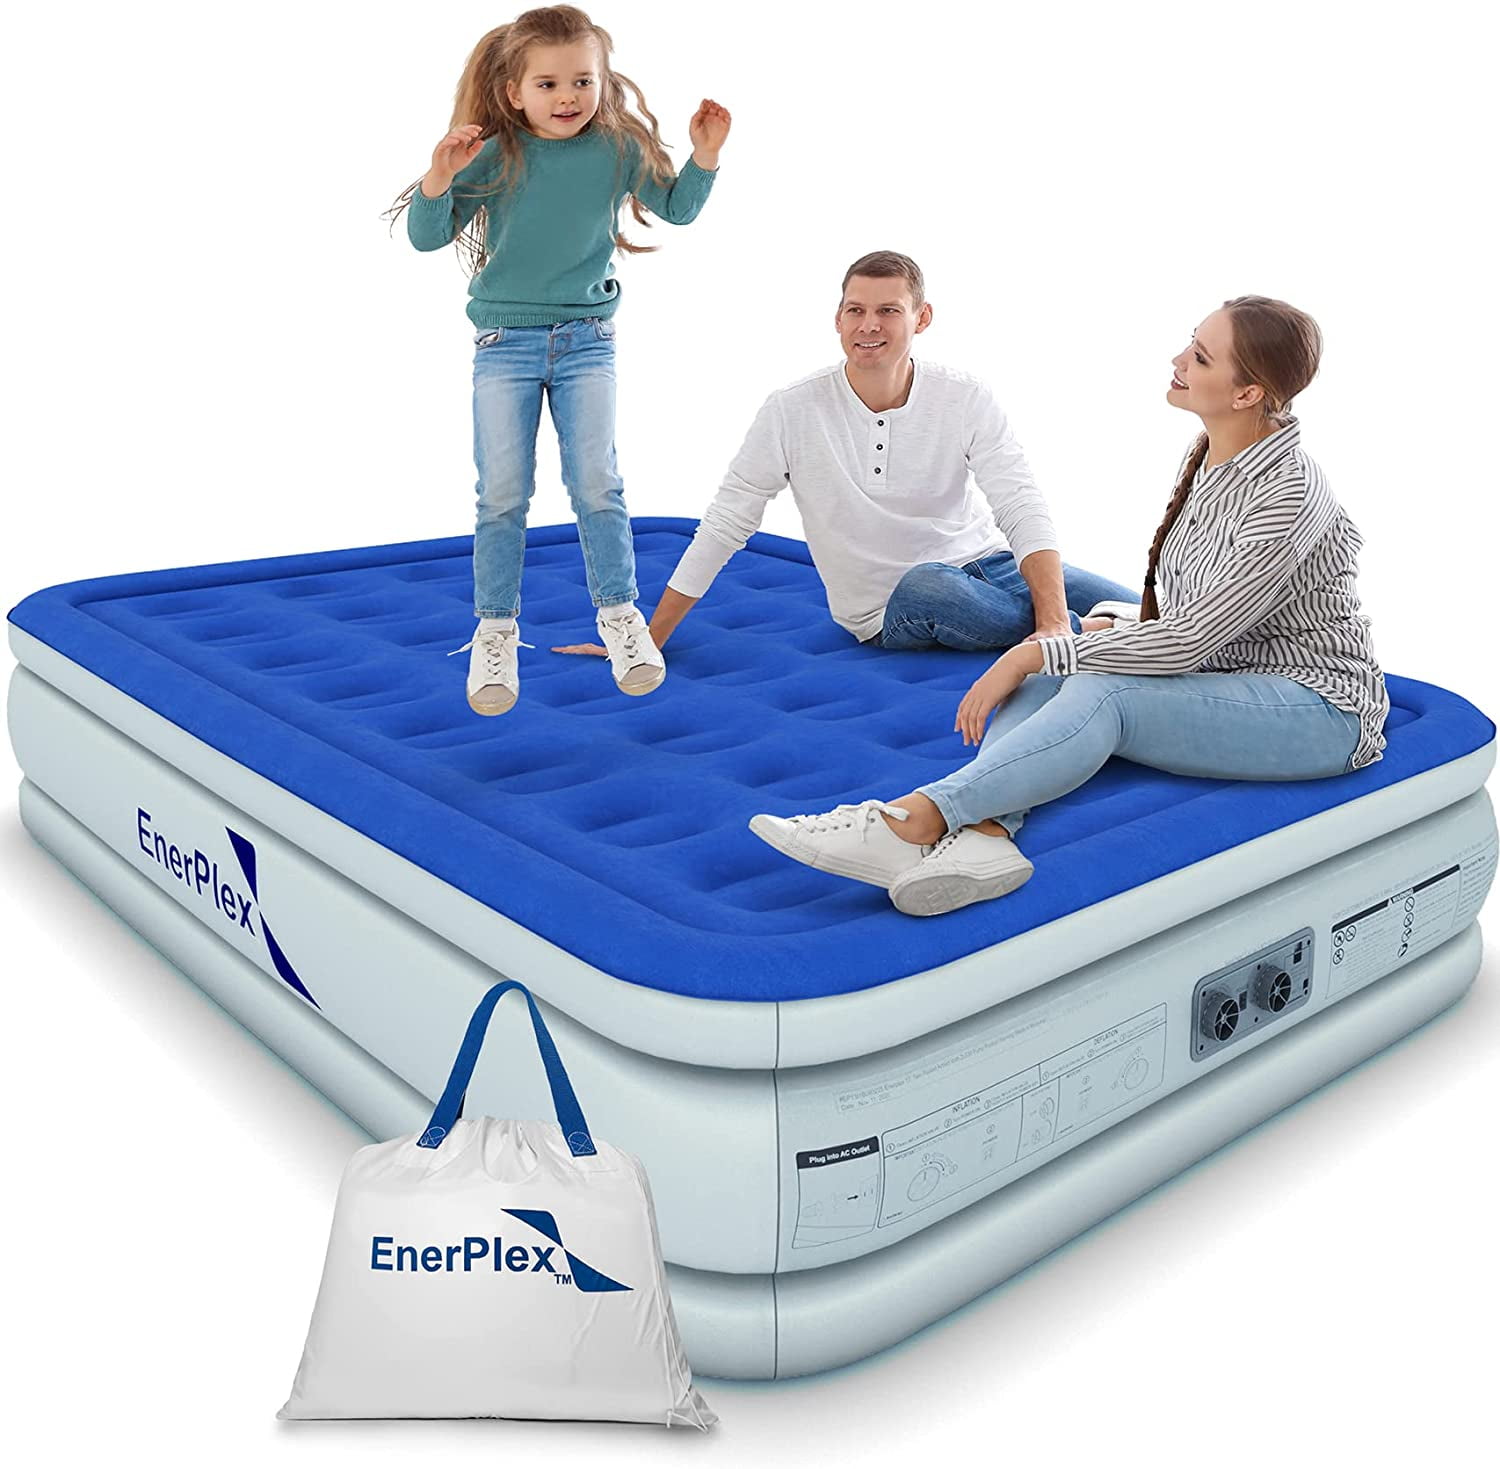 Twin 210x152x46 cm with 4D Battery Operated Air Pump Max WEYFLY Premium Air Bed Guest Bed Inflatable Twin Queen Size 198x113x46 cm 200 kg with storage bag 